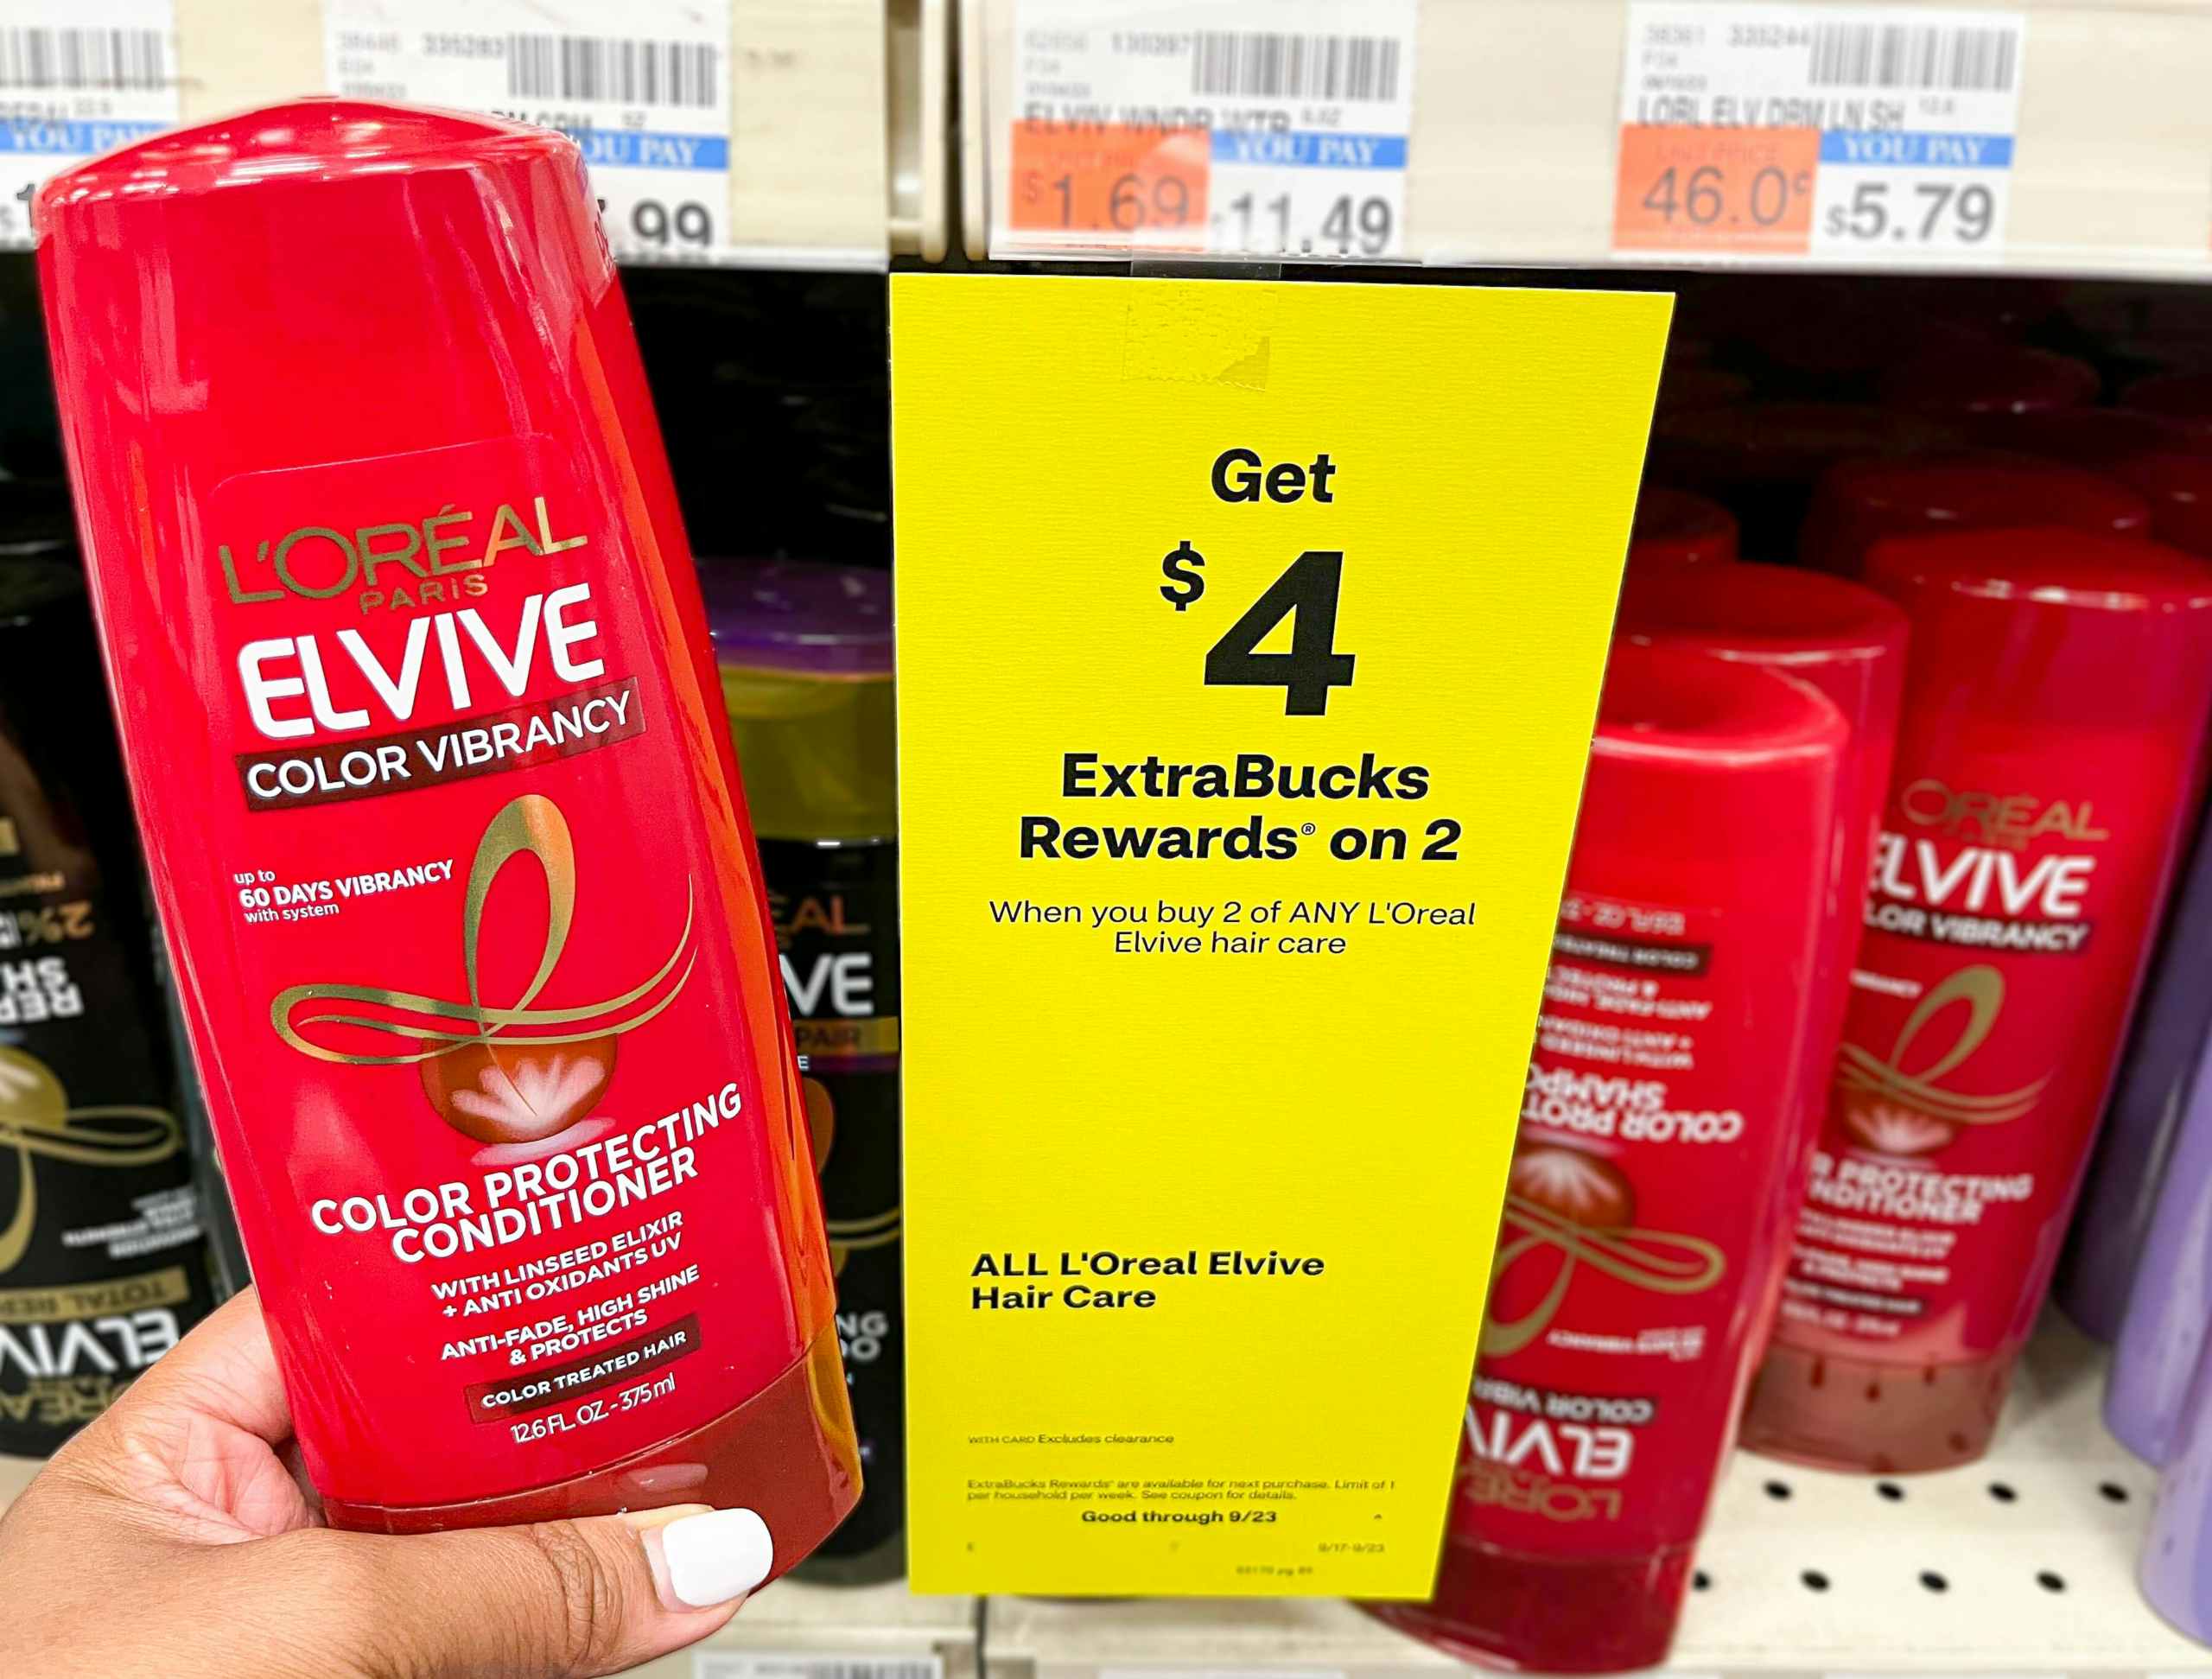 person holding a bottle of L'Oreal Elvive next to sales tag